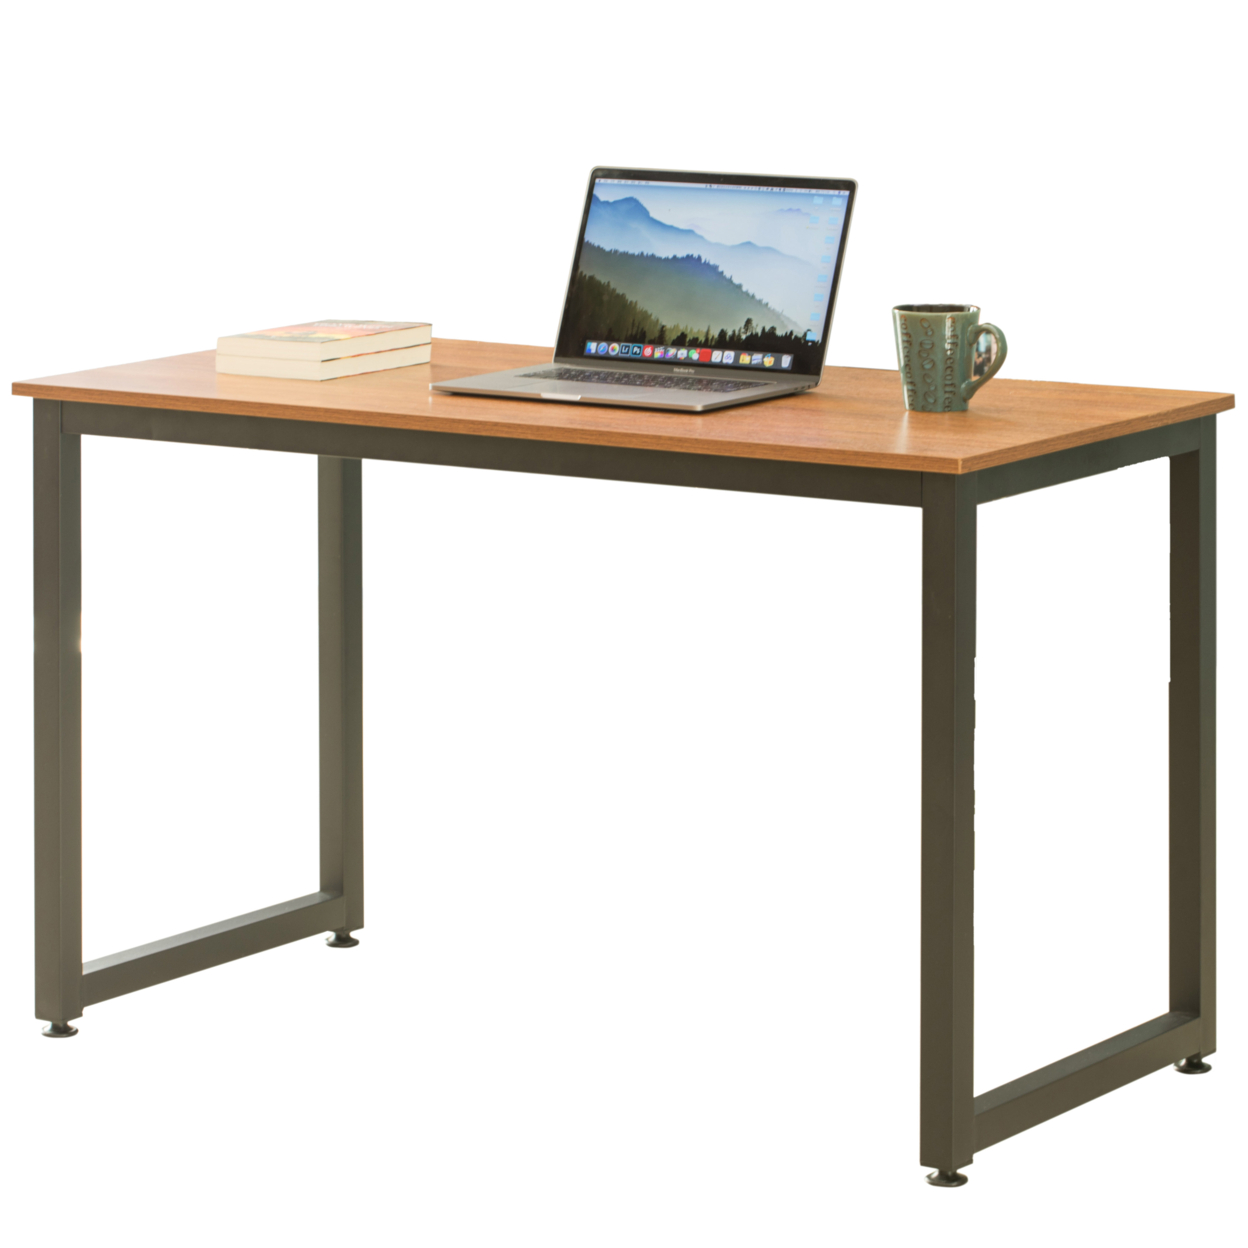 Wooden Writing Desk Homes Office Table With Sturdy Metal Frame - Natural